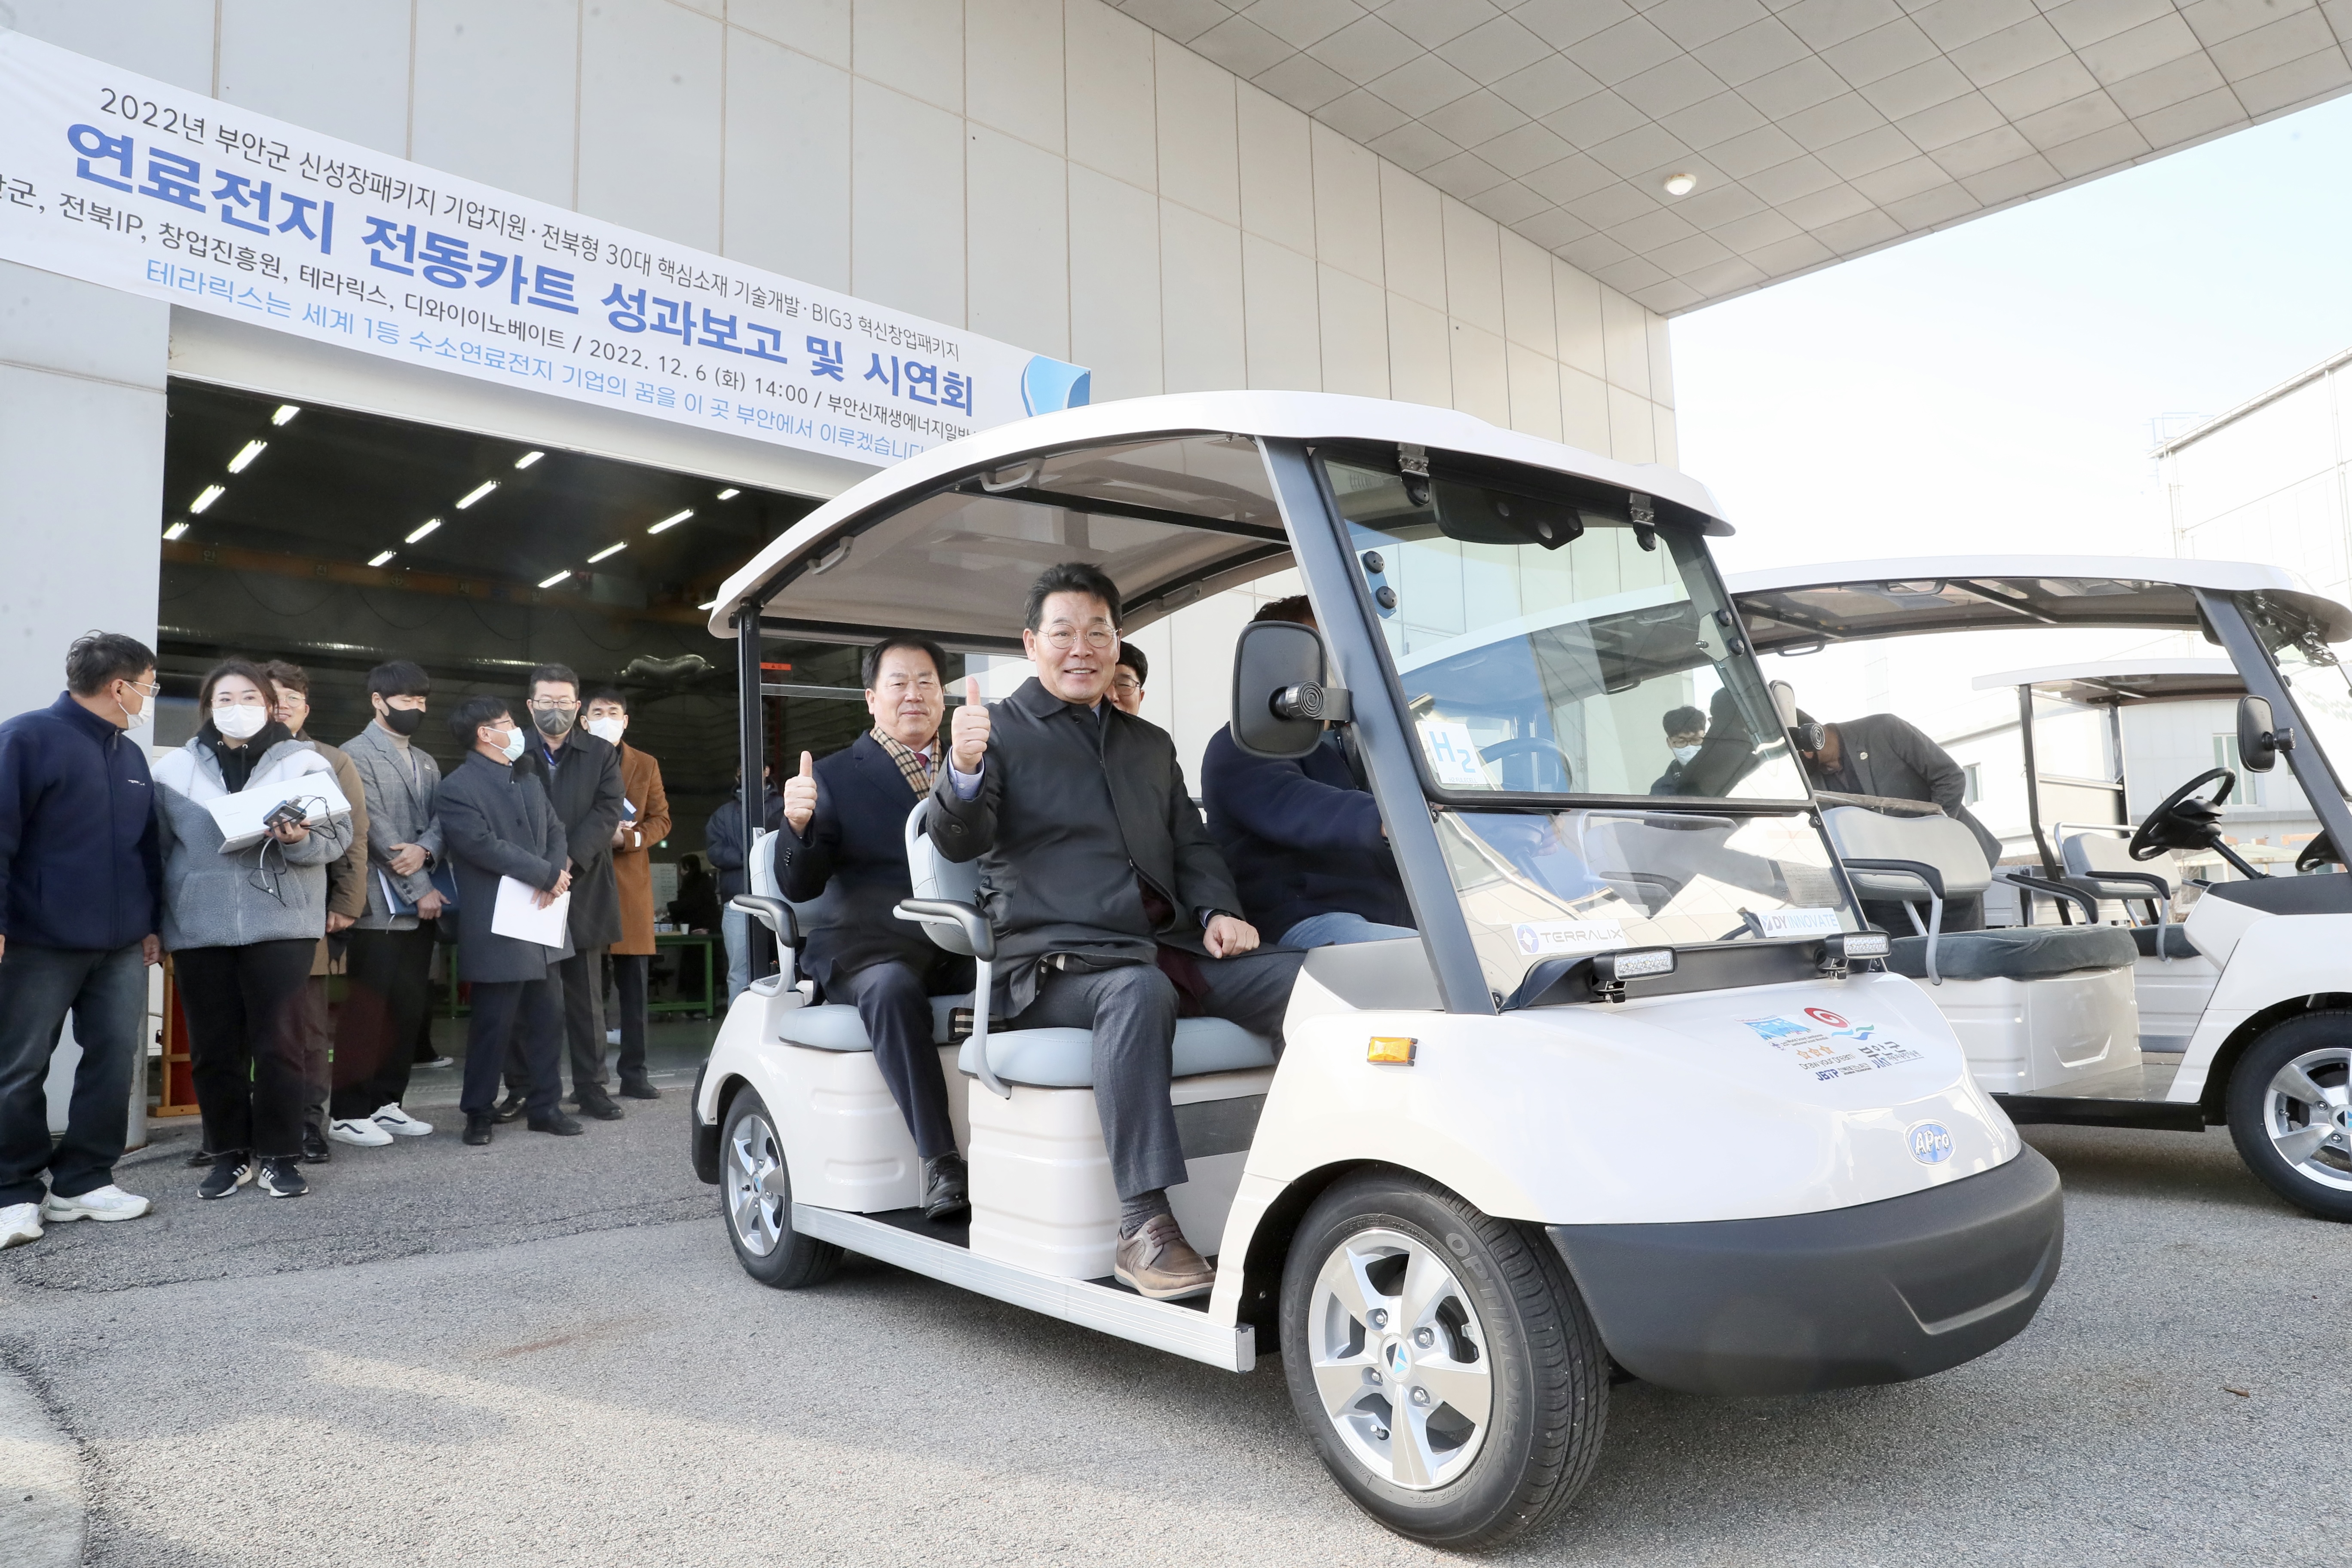 [2022.12.06] 5kW급 수소연료전지 탑재 전동카트 시연 (Demonstration of electric cart equipped with 5kW hydrogen fuel cell)